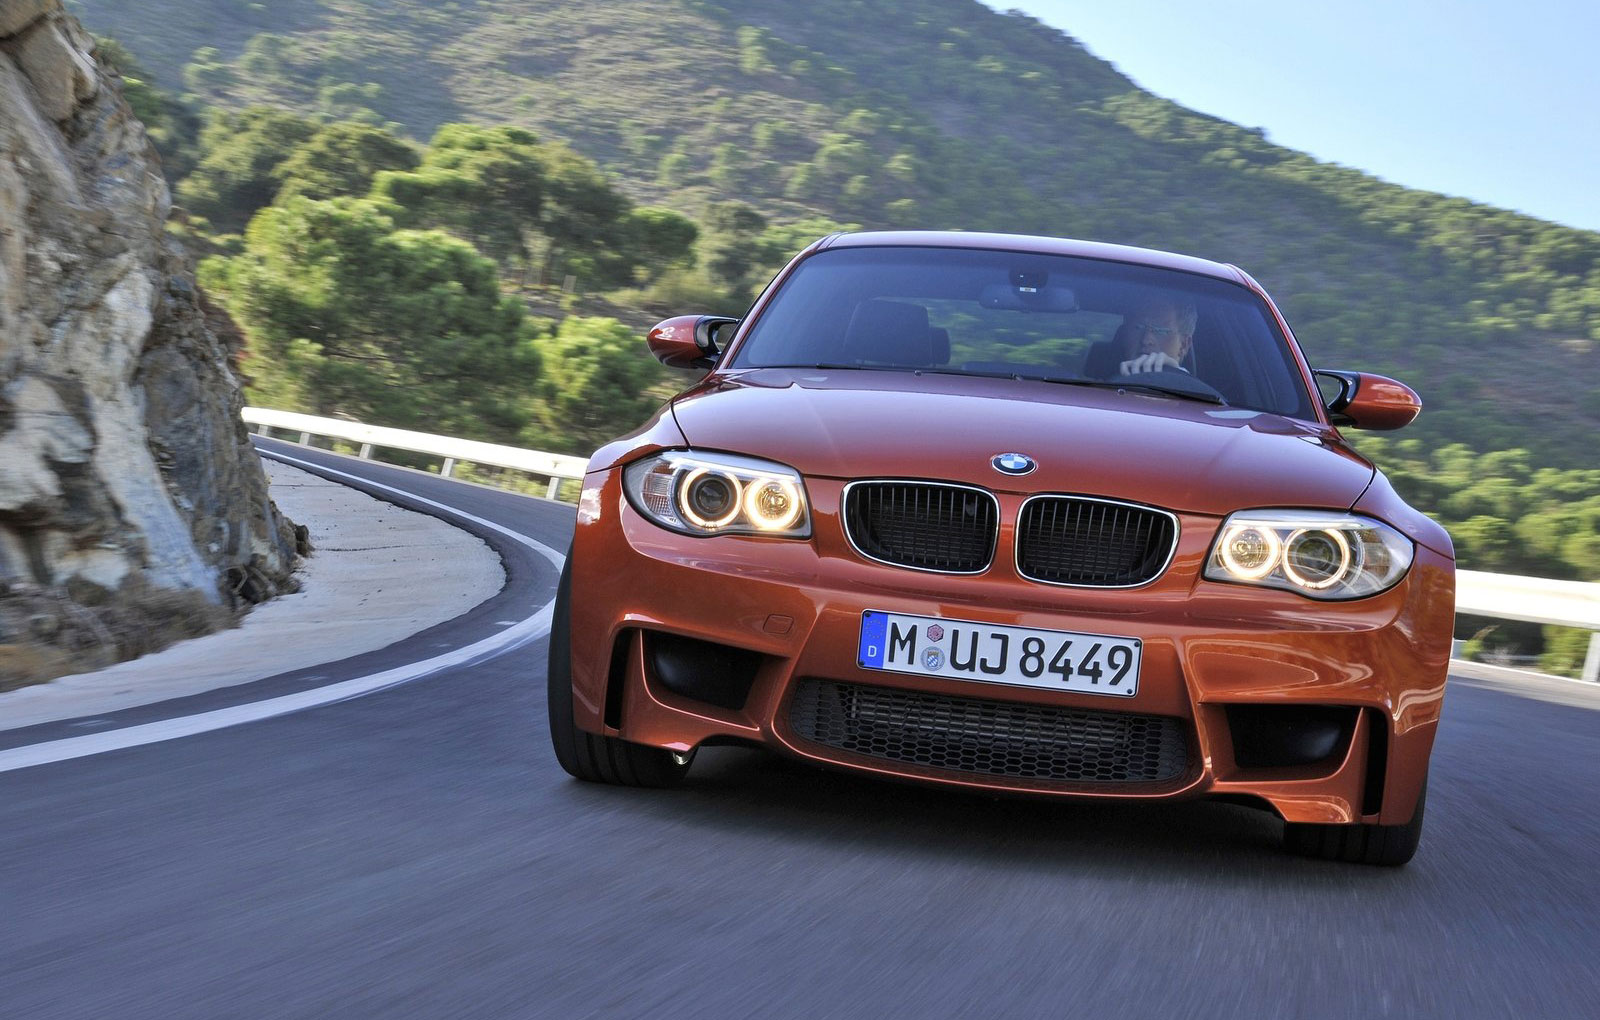 The new BMW 1 Series M Coupe proves its capabilities at Hockenheim